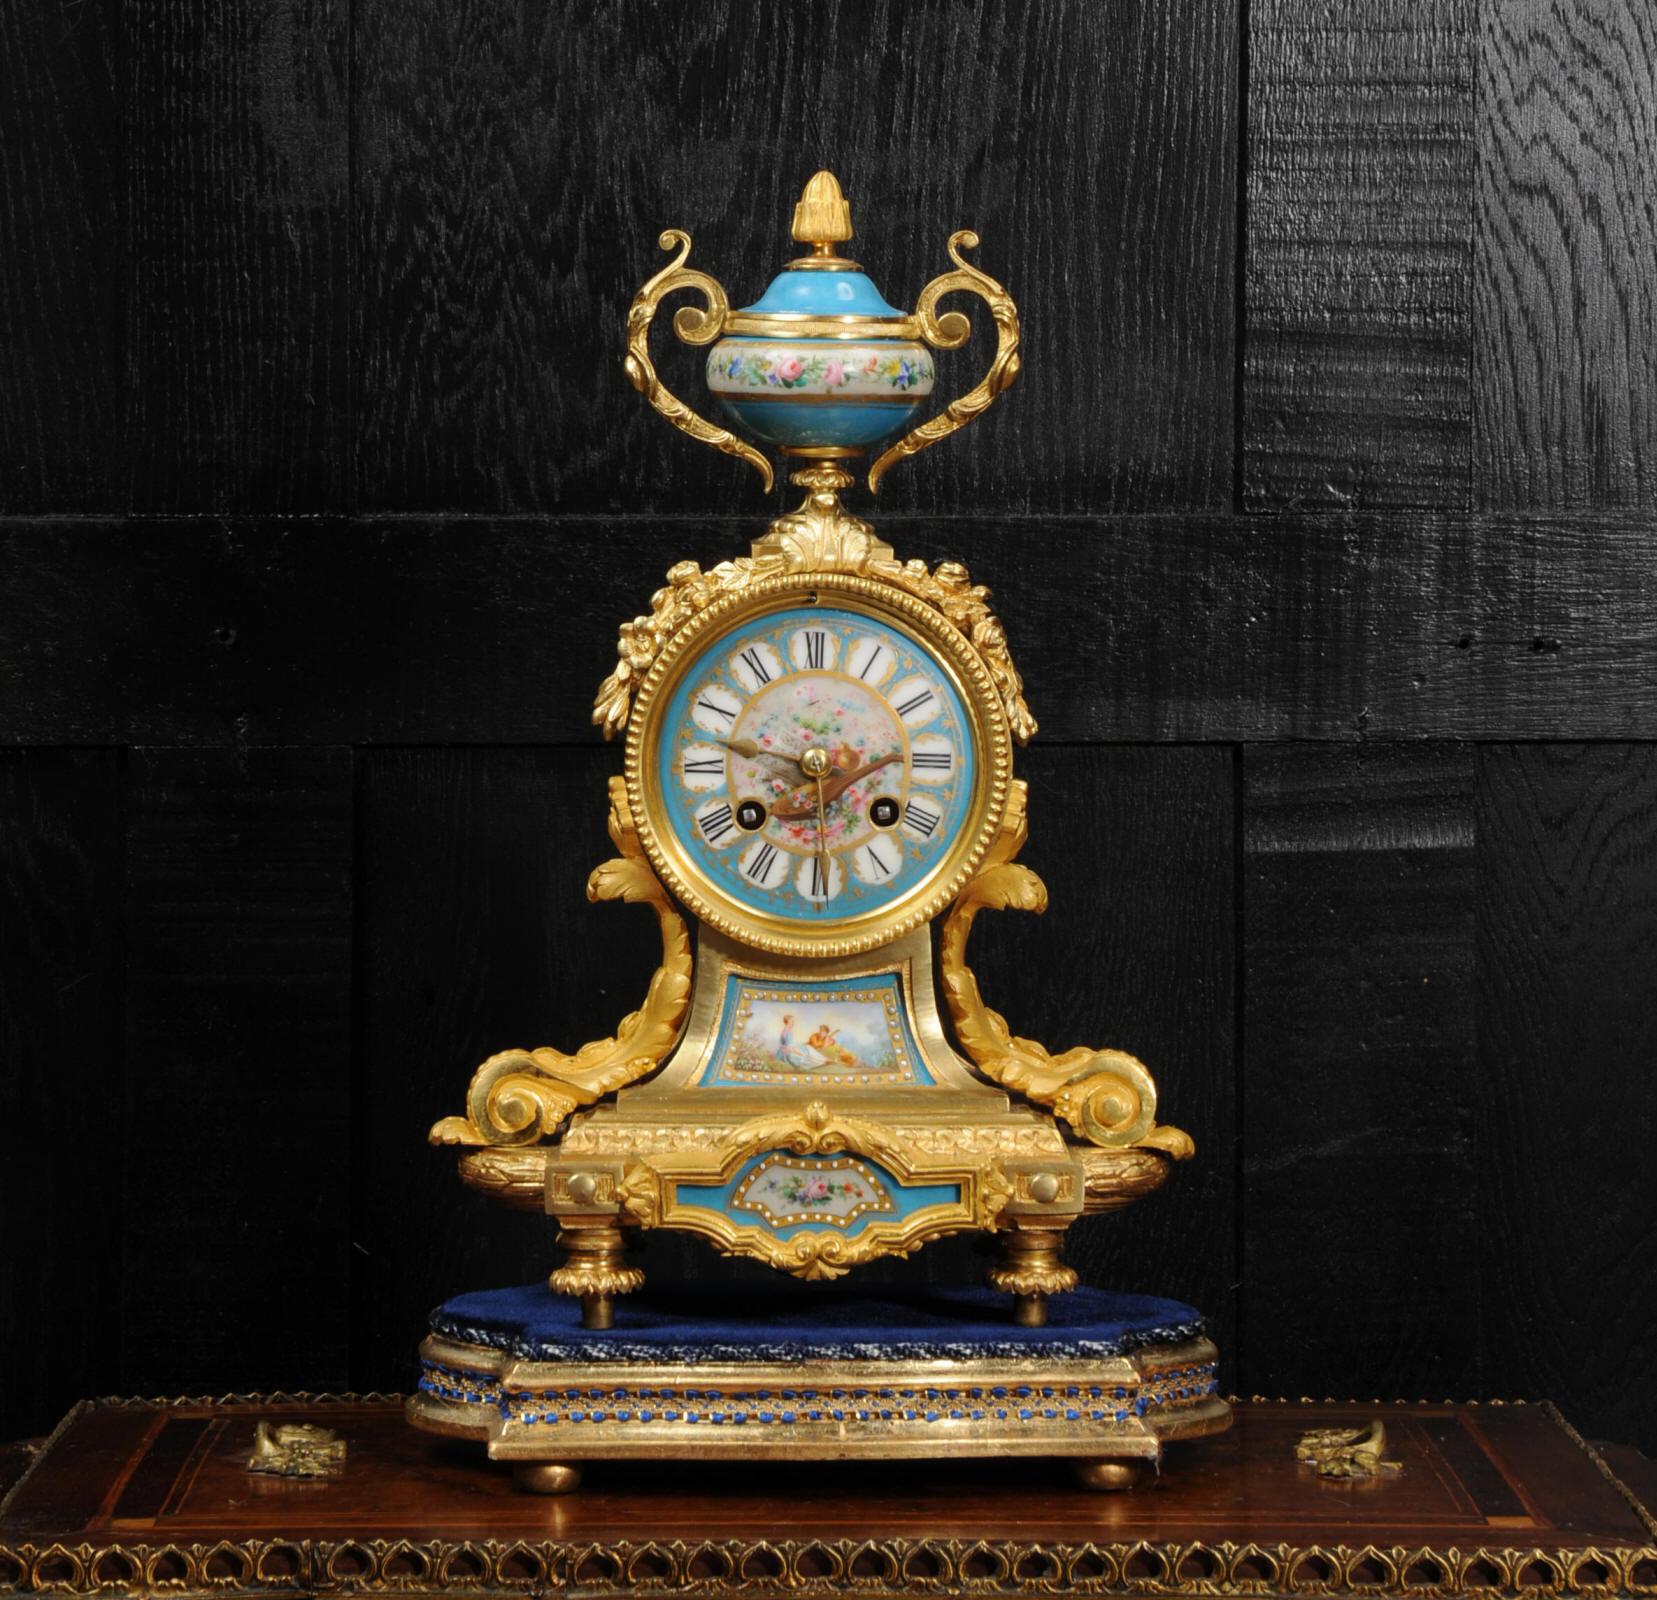 A stunning original antique French clock by Japy Freres, circa 1890. The crisp ormolu (finely gilded bronze), beautifully modelled and chased, is mounted with exquisite Sèvres style porcelain. Porcelain has a blue ground and is delicately painted